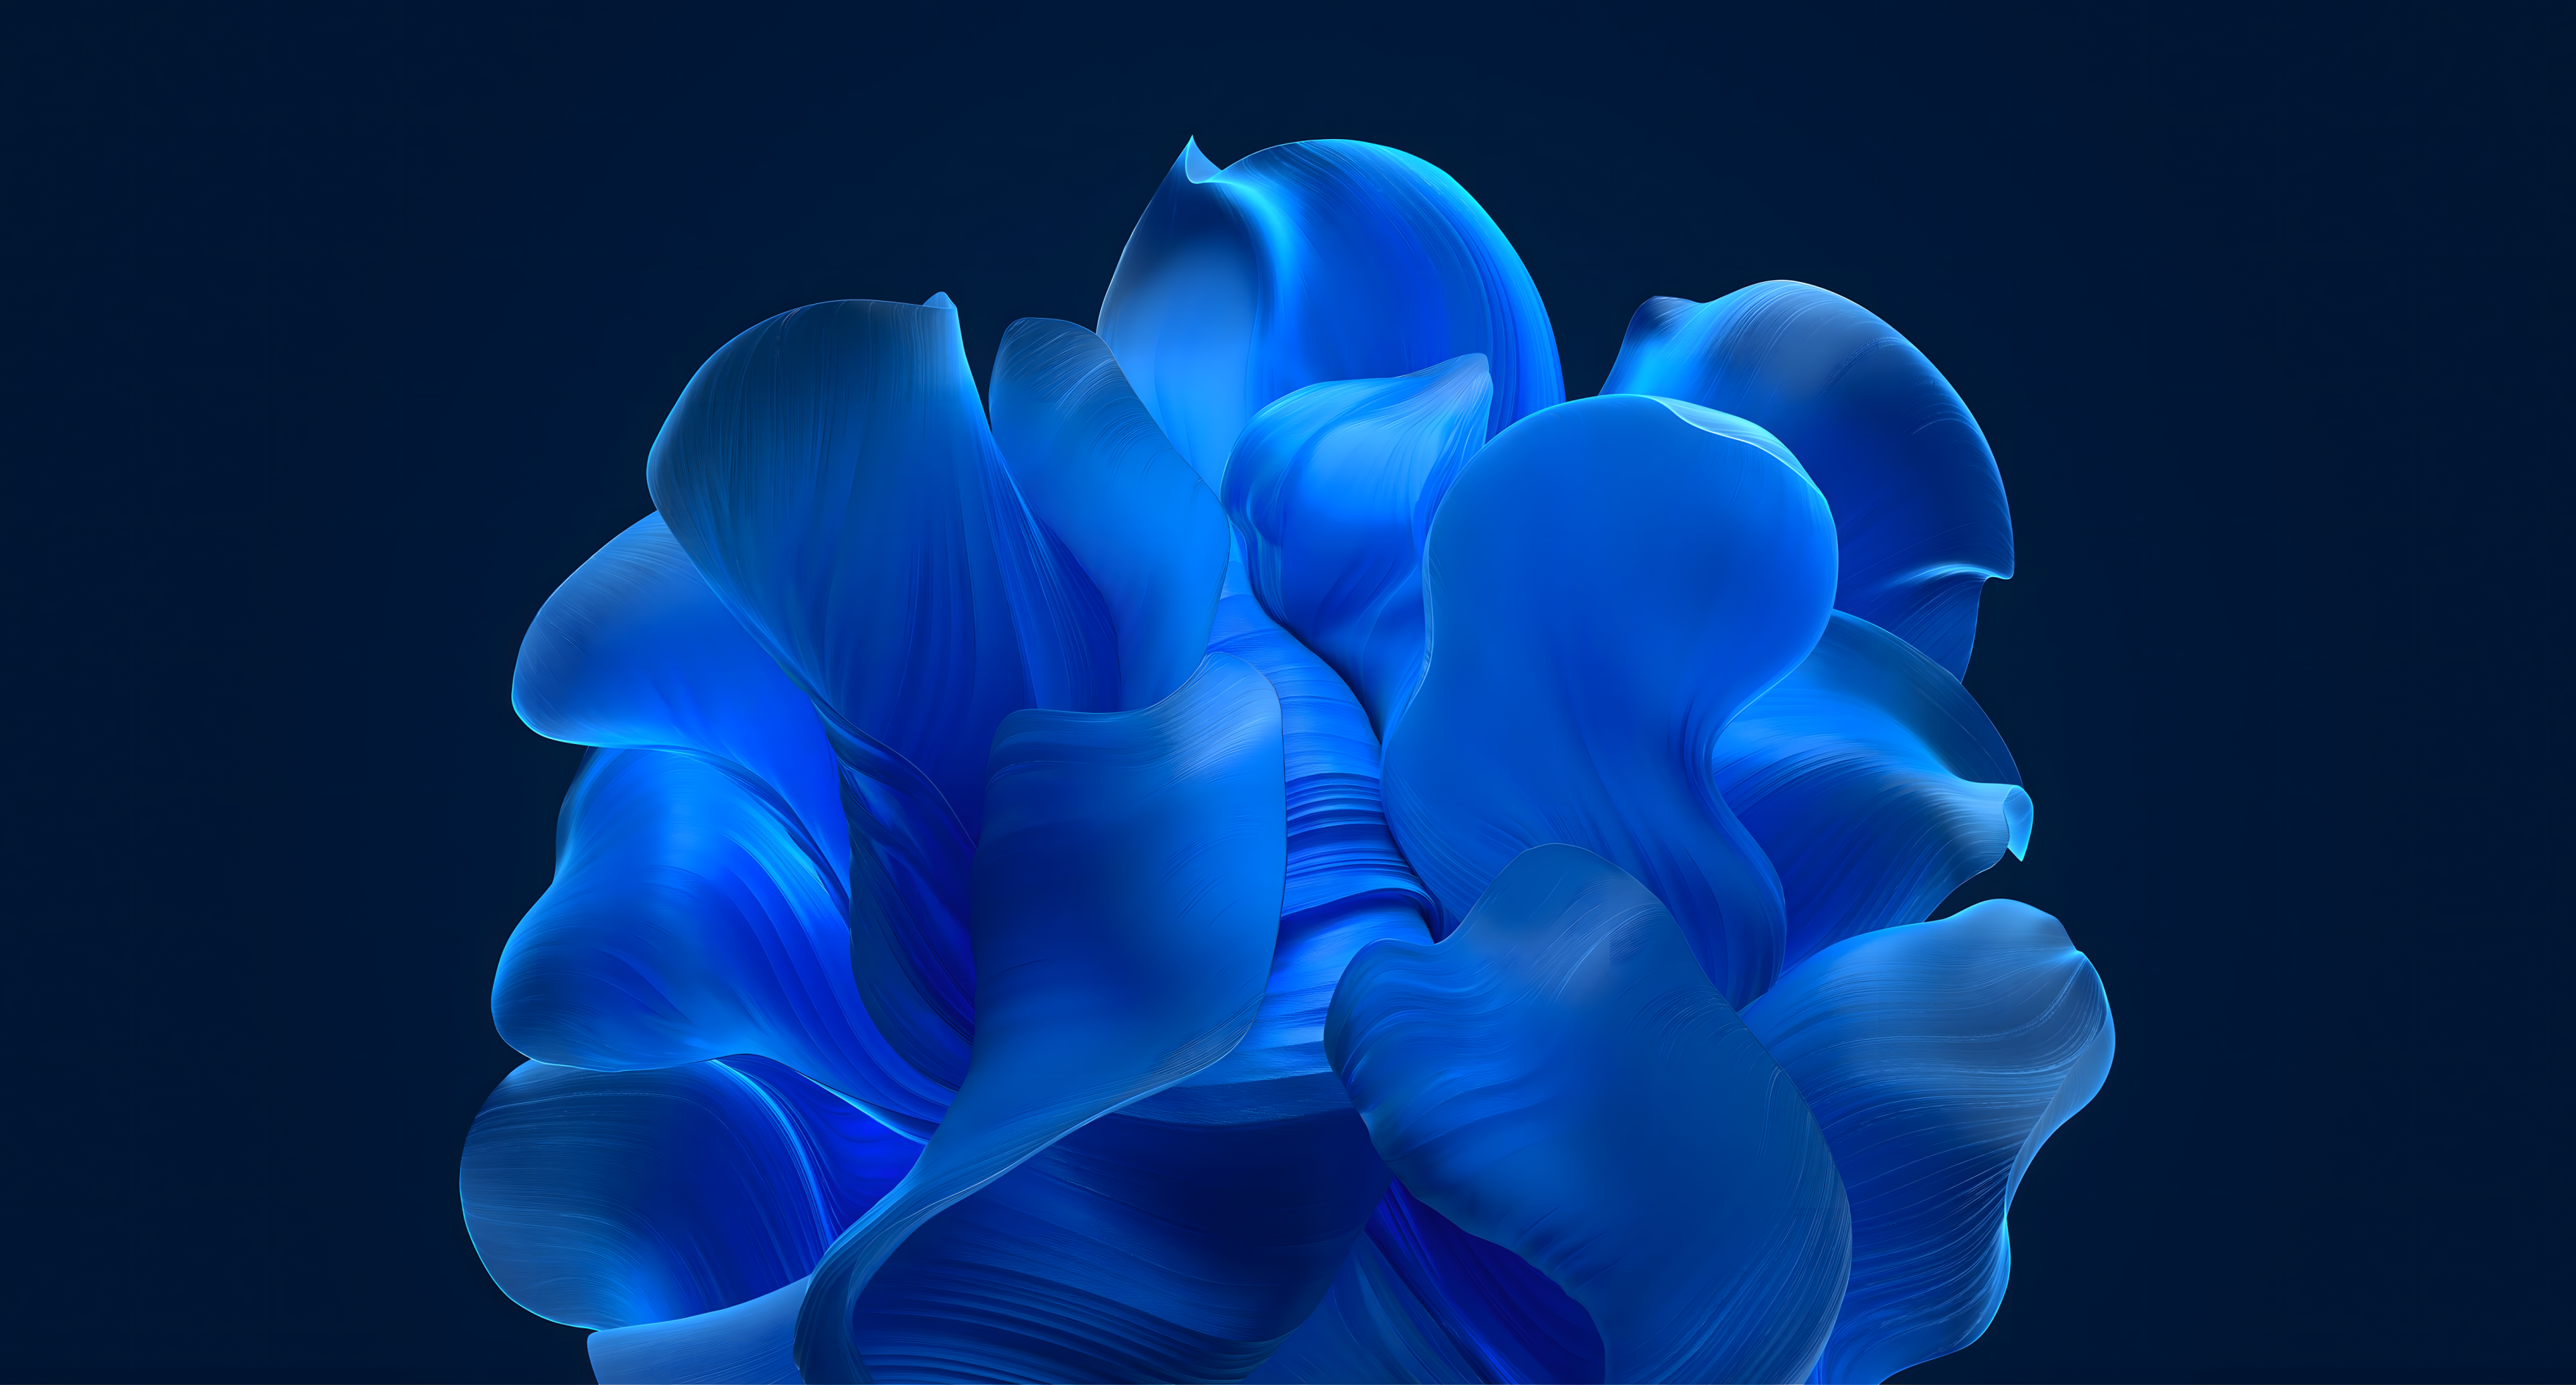 Check Out This Never Released Windows 11 Bloom Wallpaper